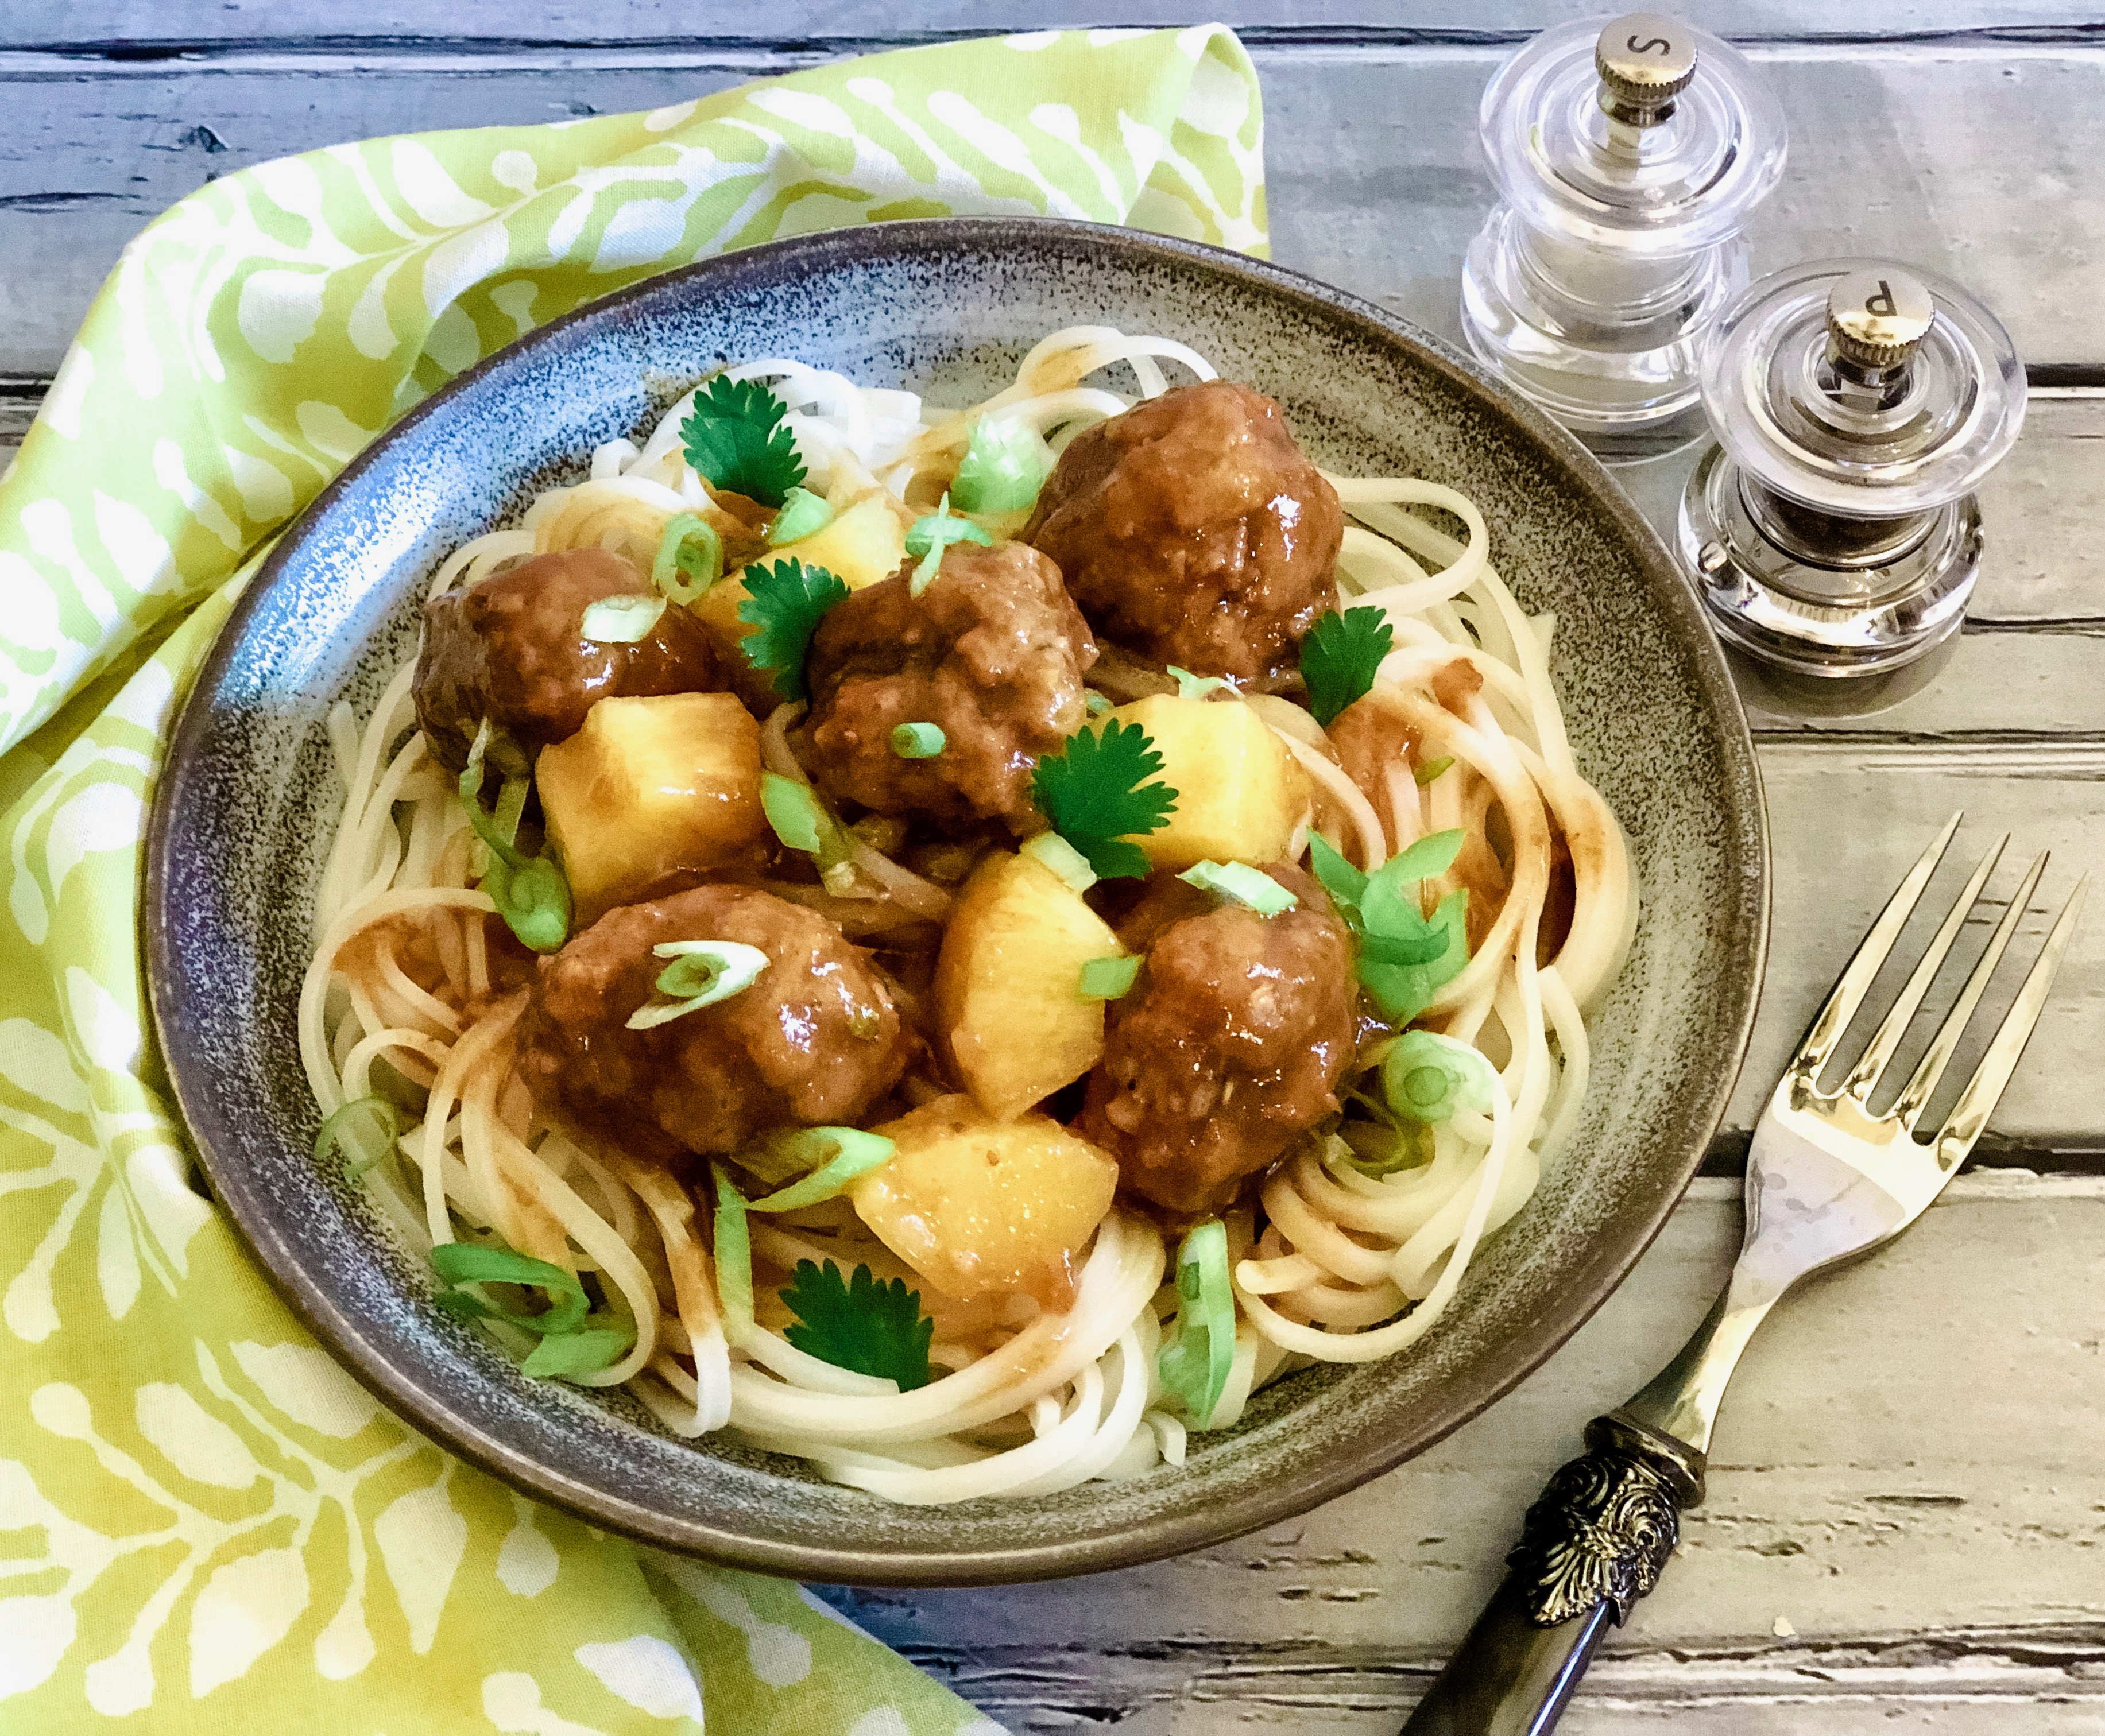 Ssweet and sour meatballs in a round dish over noodles